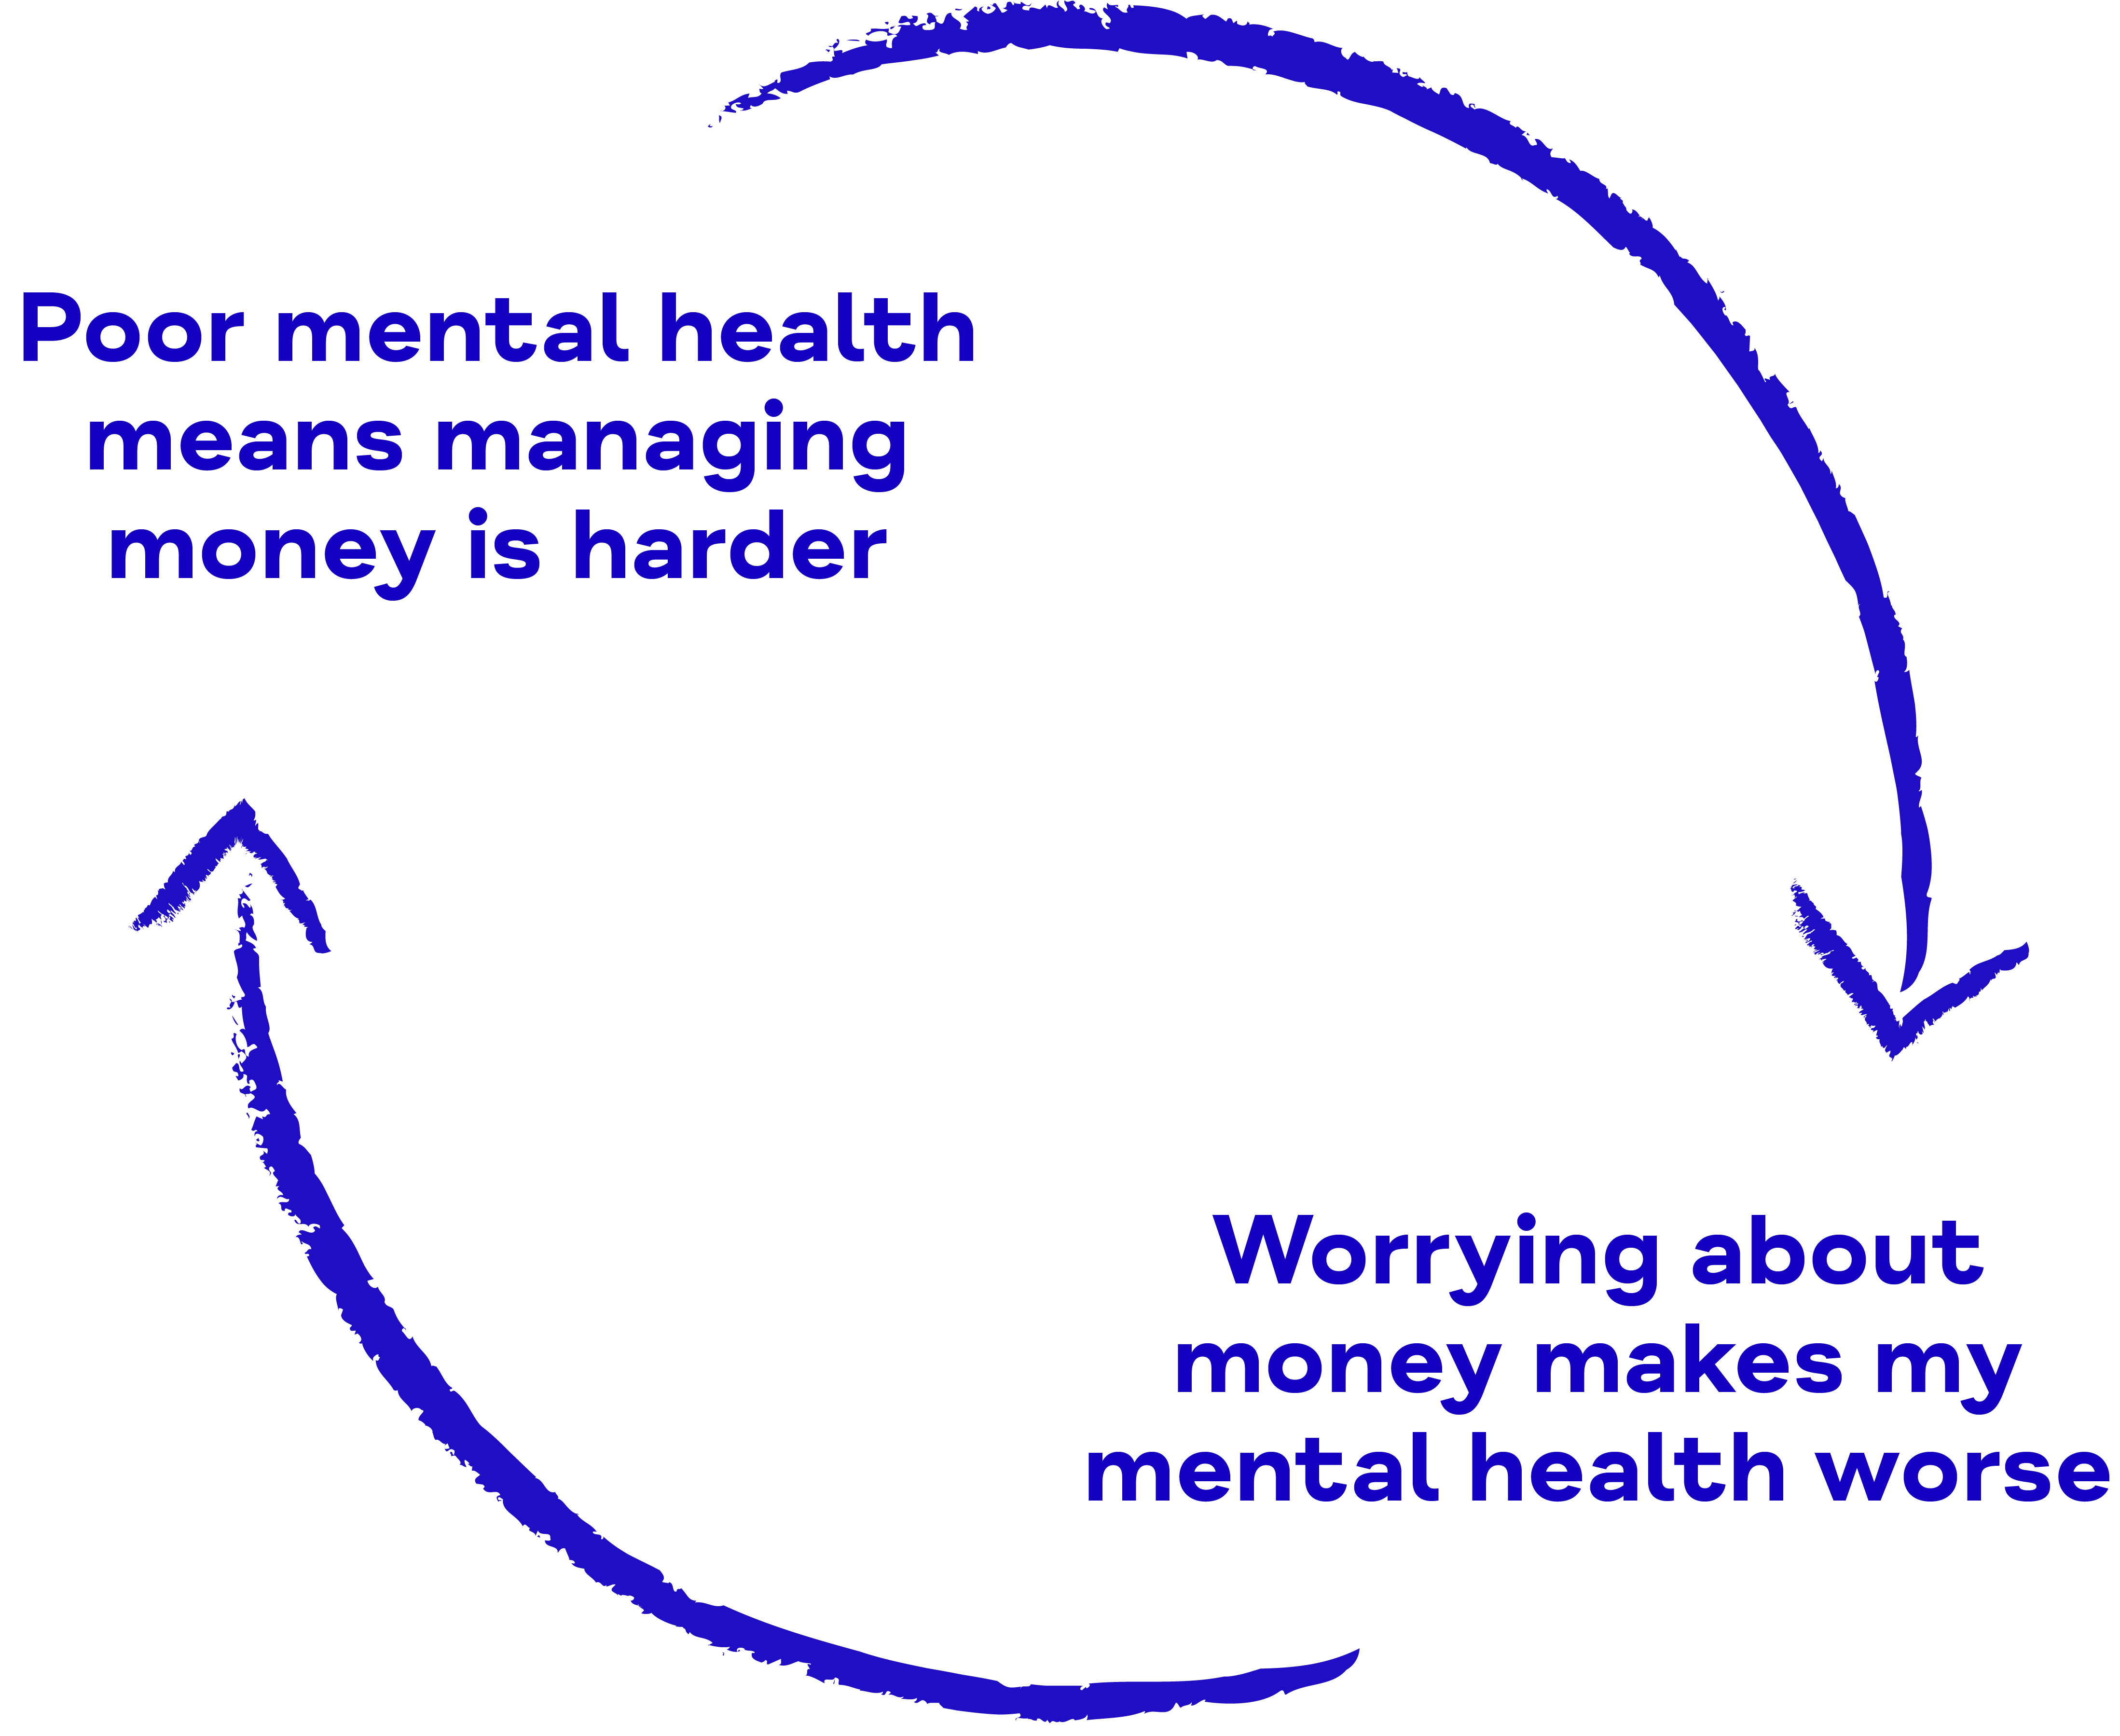 Graphic showing vicious circle, that poor mental health can make managing money harder, which can make your mental health worse.